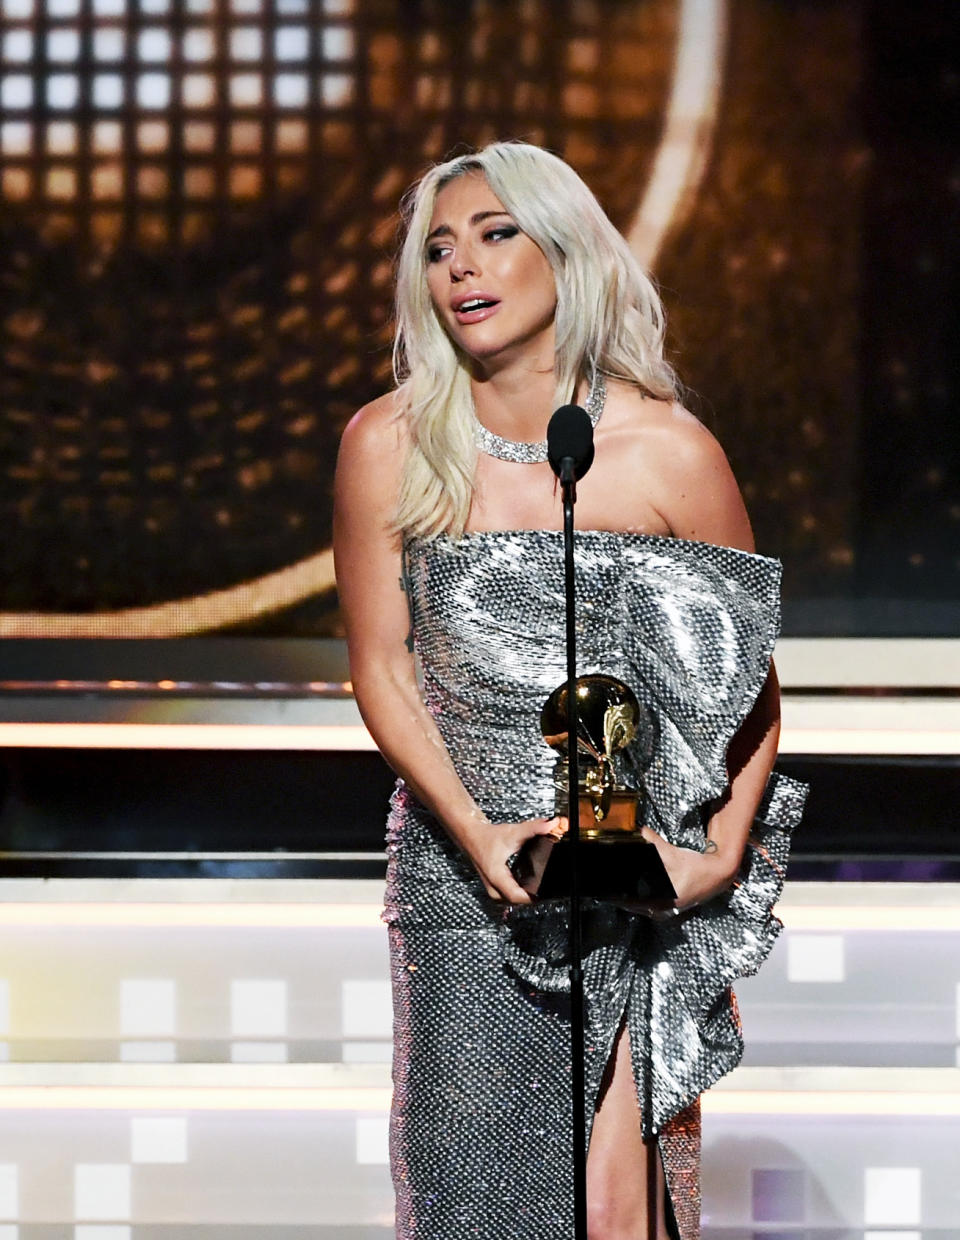 Lady Gaga accepts the Best Pop Duo/Group Performance award for “Shallow” (with Bradley Cooper) at the 61st Annual Grammy Awards Feb. 10, 2019, in Los Angeles. (Photo: Kevin Winter/Getty Images for the Recording Academy)